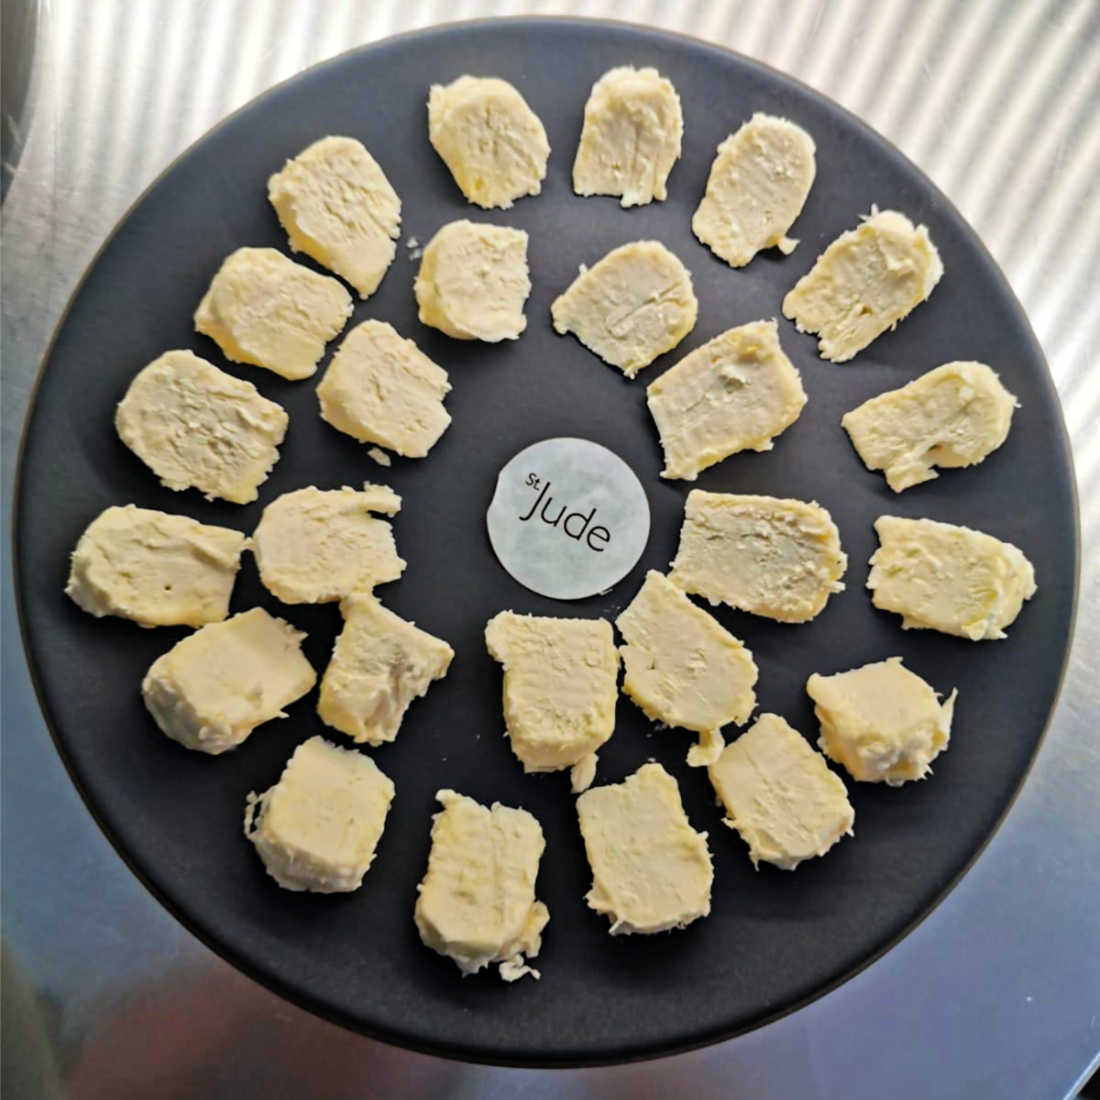 St-Jude-Cheese-Plate